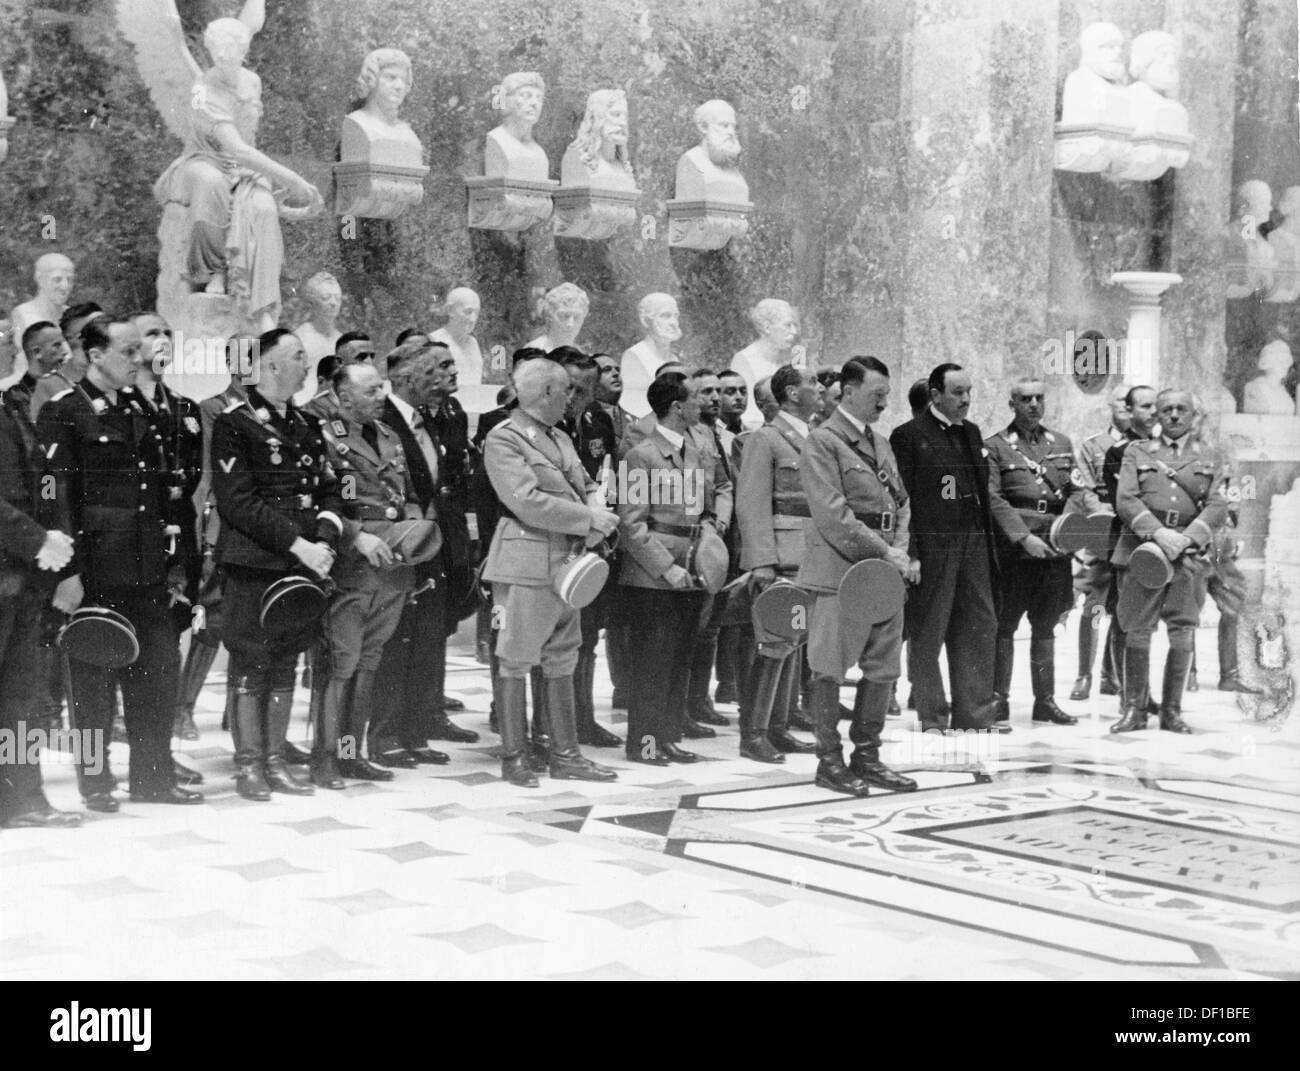 The image from the Nazi Propaganda! shows Hitler on the occasion of the unveiling of the bust for the 'German naturalized' Austrian composer Anton Bruckner in the Walhalla in Regensburg, Germany, 6 June 1937. Front row l-r: Reich Minister Franz Gürtner (left margin), Reich Minister Walther Darré, Reichsführer SS Heinrich Himmler, unknown, the ambassador of the German Reich in Vienna Franz von Papen, Bavarian Premier Ludwig Siebert (in conversation), Joseph Goebbels, Franz Ritter von Epp, Hitler, Austrian ambassador in Germany Stephan Tauschitz (in white tie). Fotoarchiv für Zeitgeschichte Stock Photo